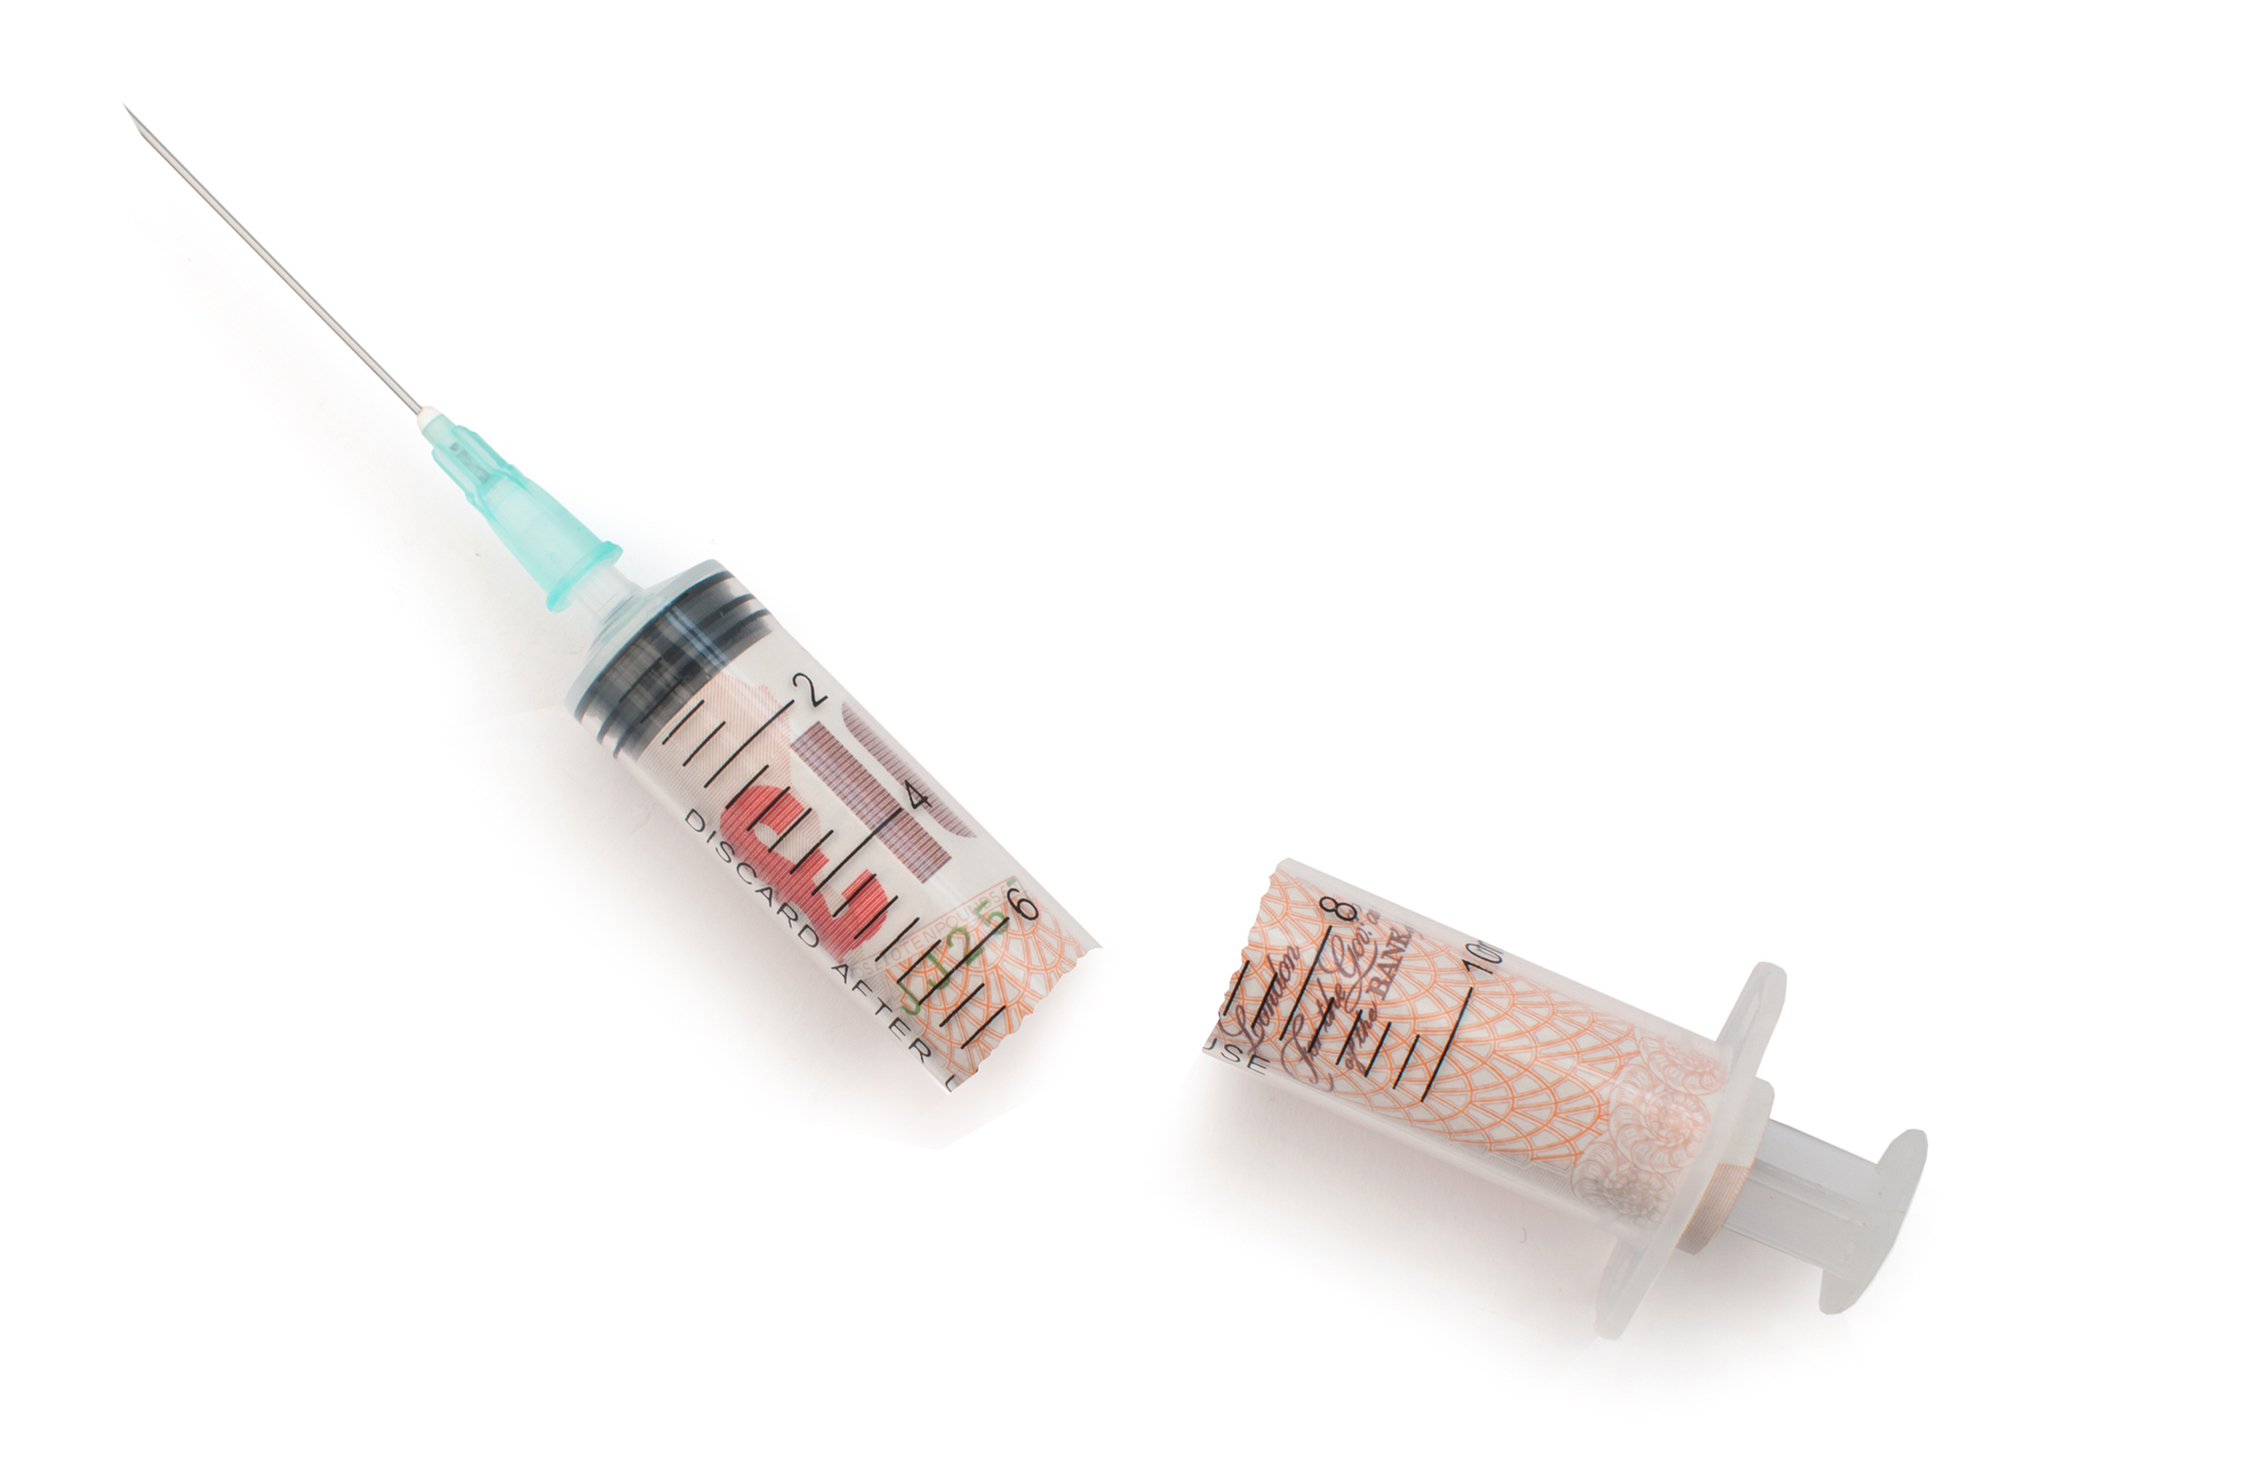 Broken injection syringe containing uk banknotes over a white background